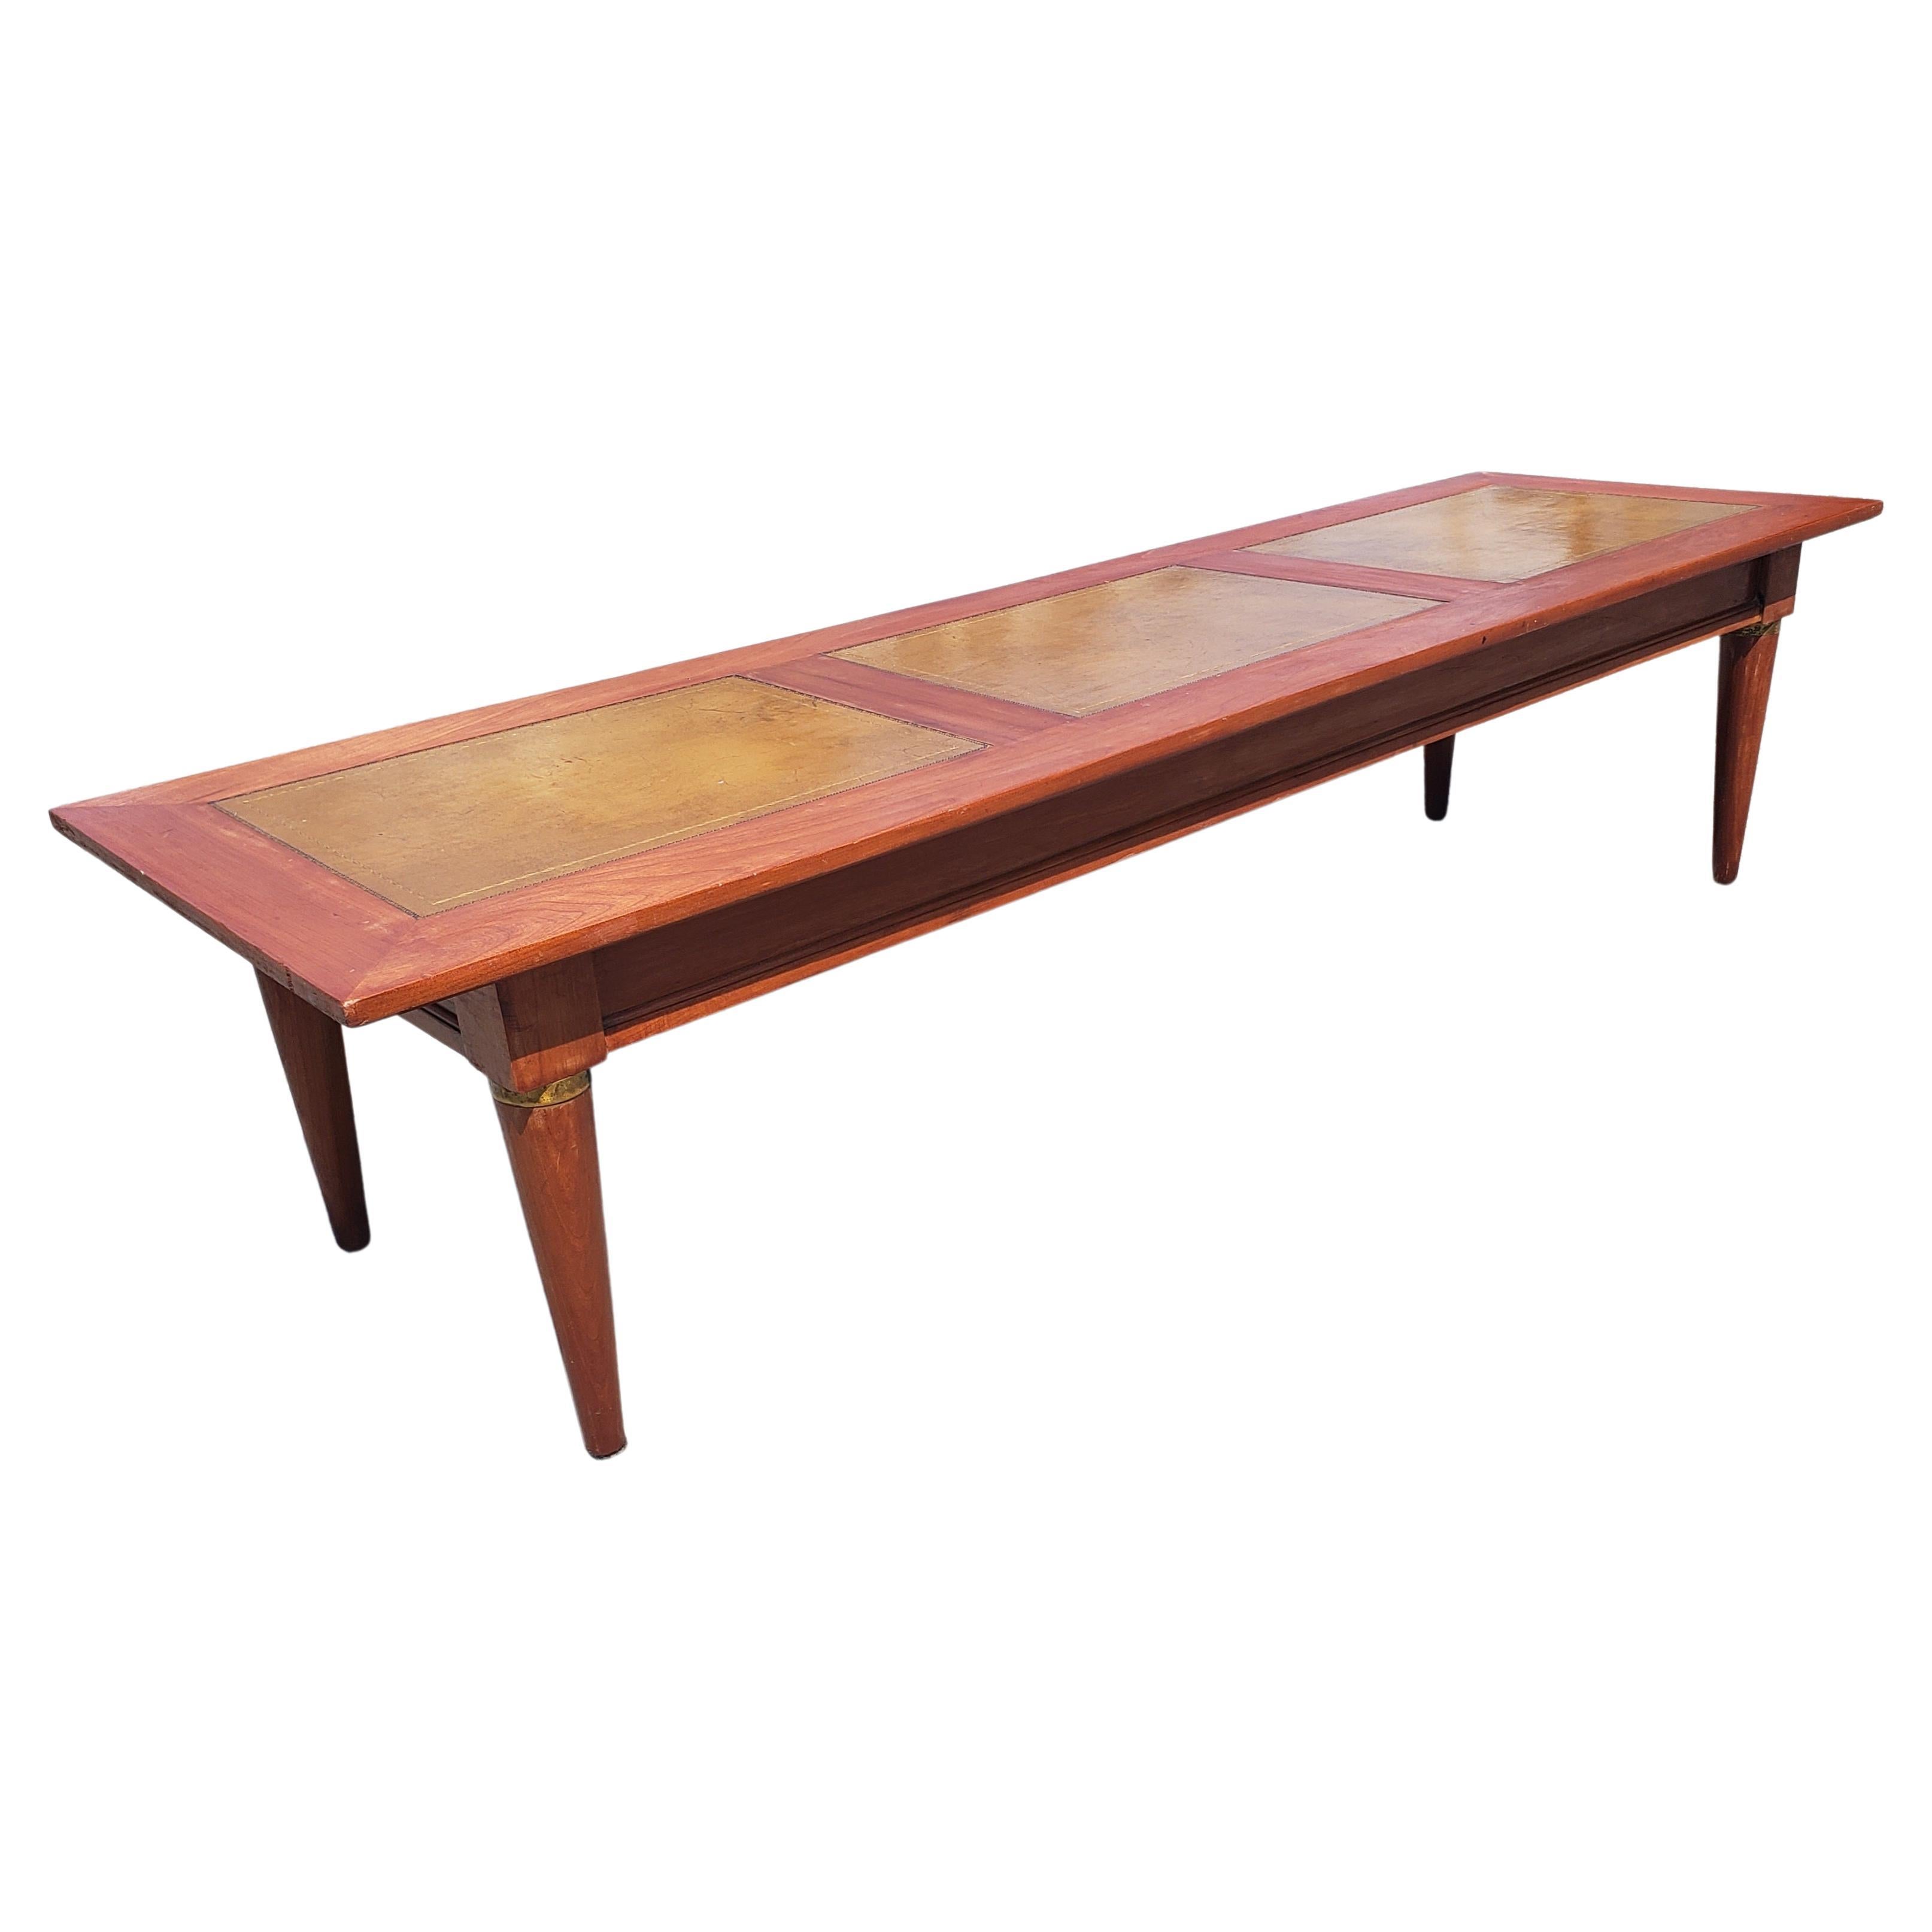 Beautiful long solid cherry with leather top coffee table , cocktail table in good condition. 
Measures 60 inches in width, 18 inches in depth and stands 18 inches tall.